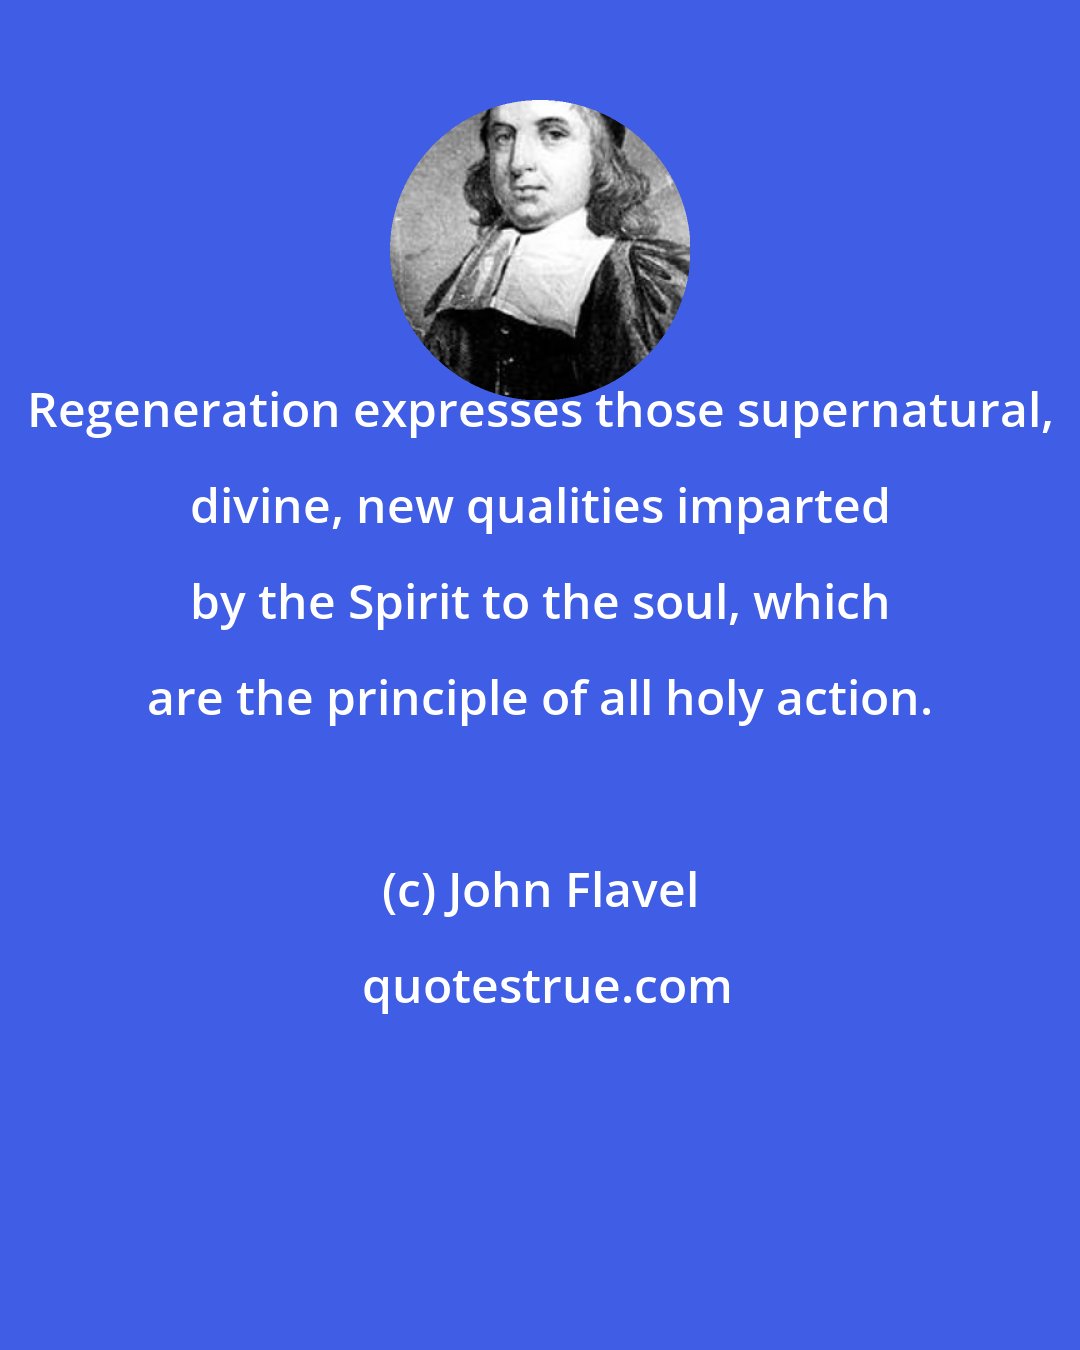 John Flavel: Regeneration expresses those supernatural, divine, new qualities imparted by the Spirit to the soul, which are the principle of all holy action.